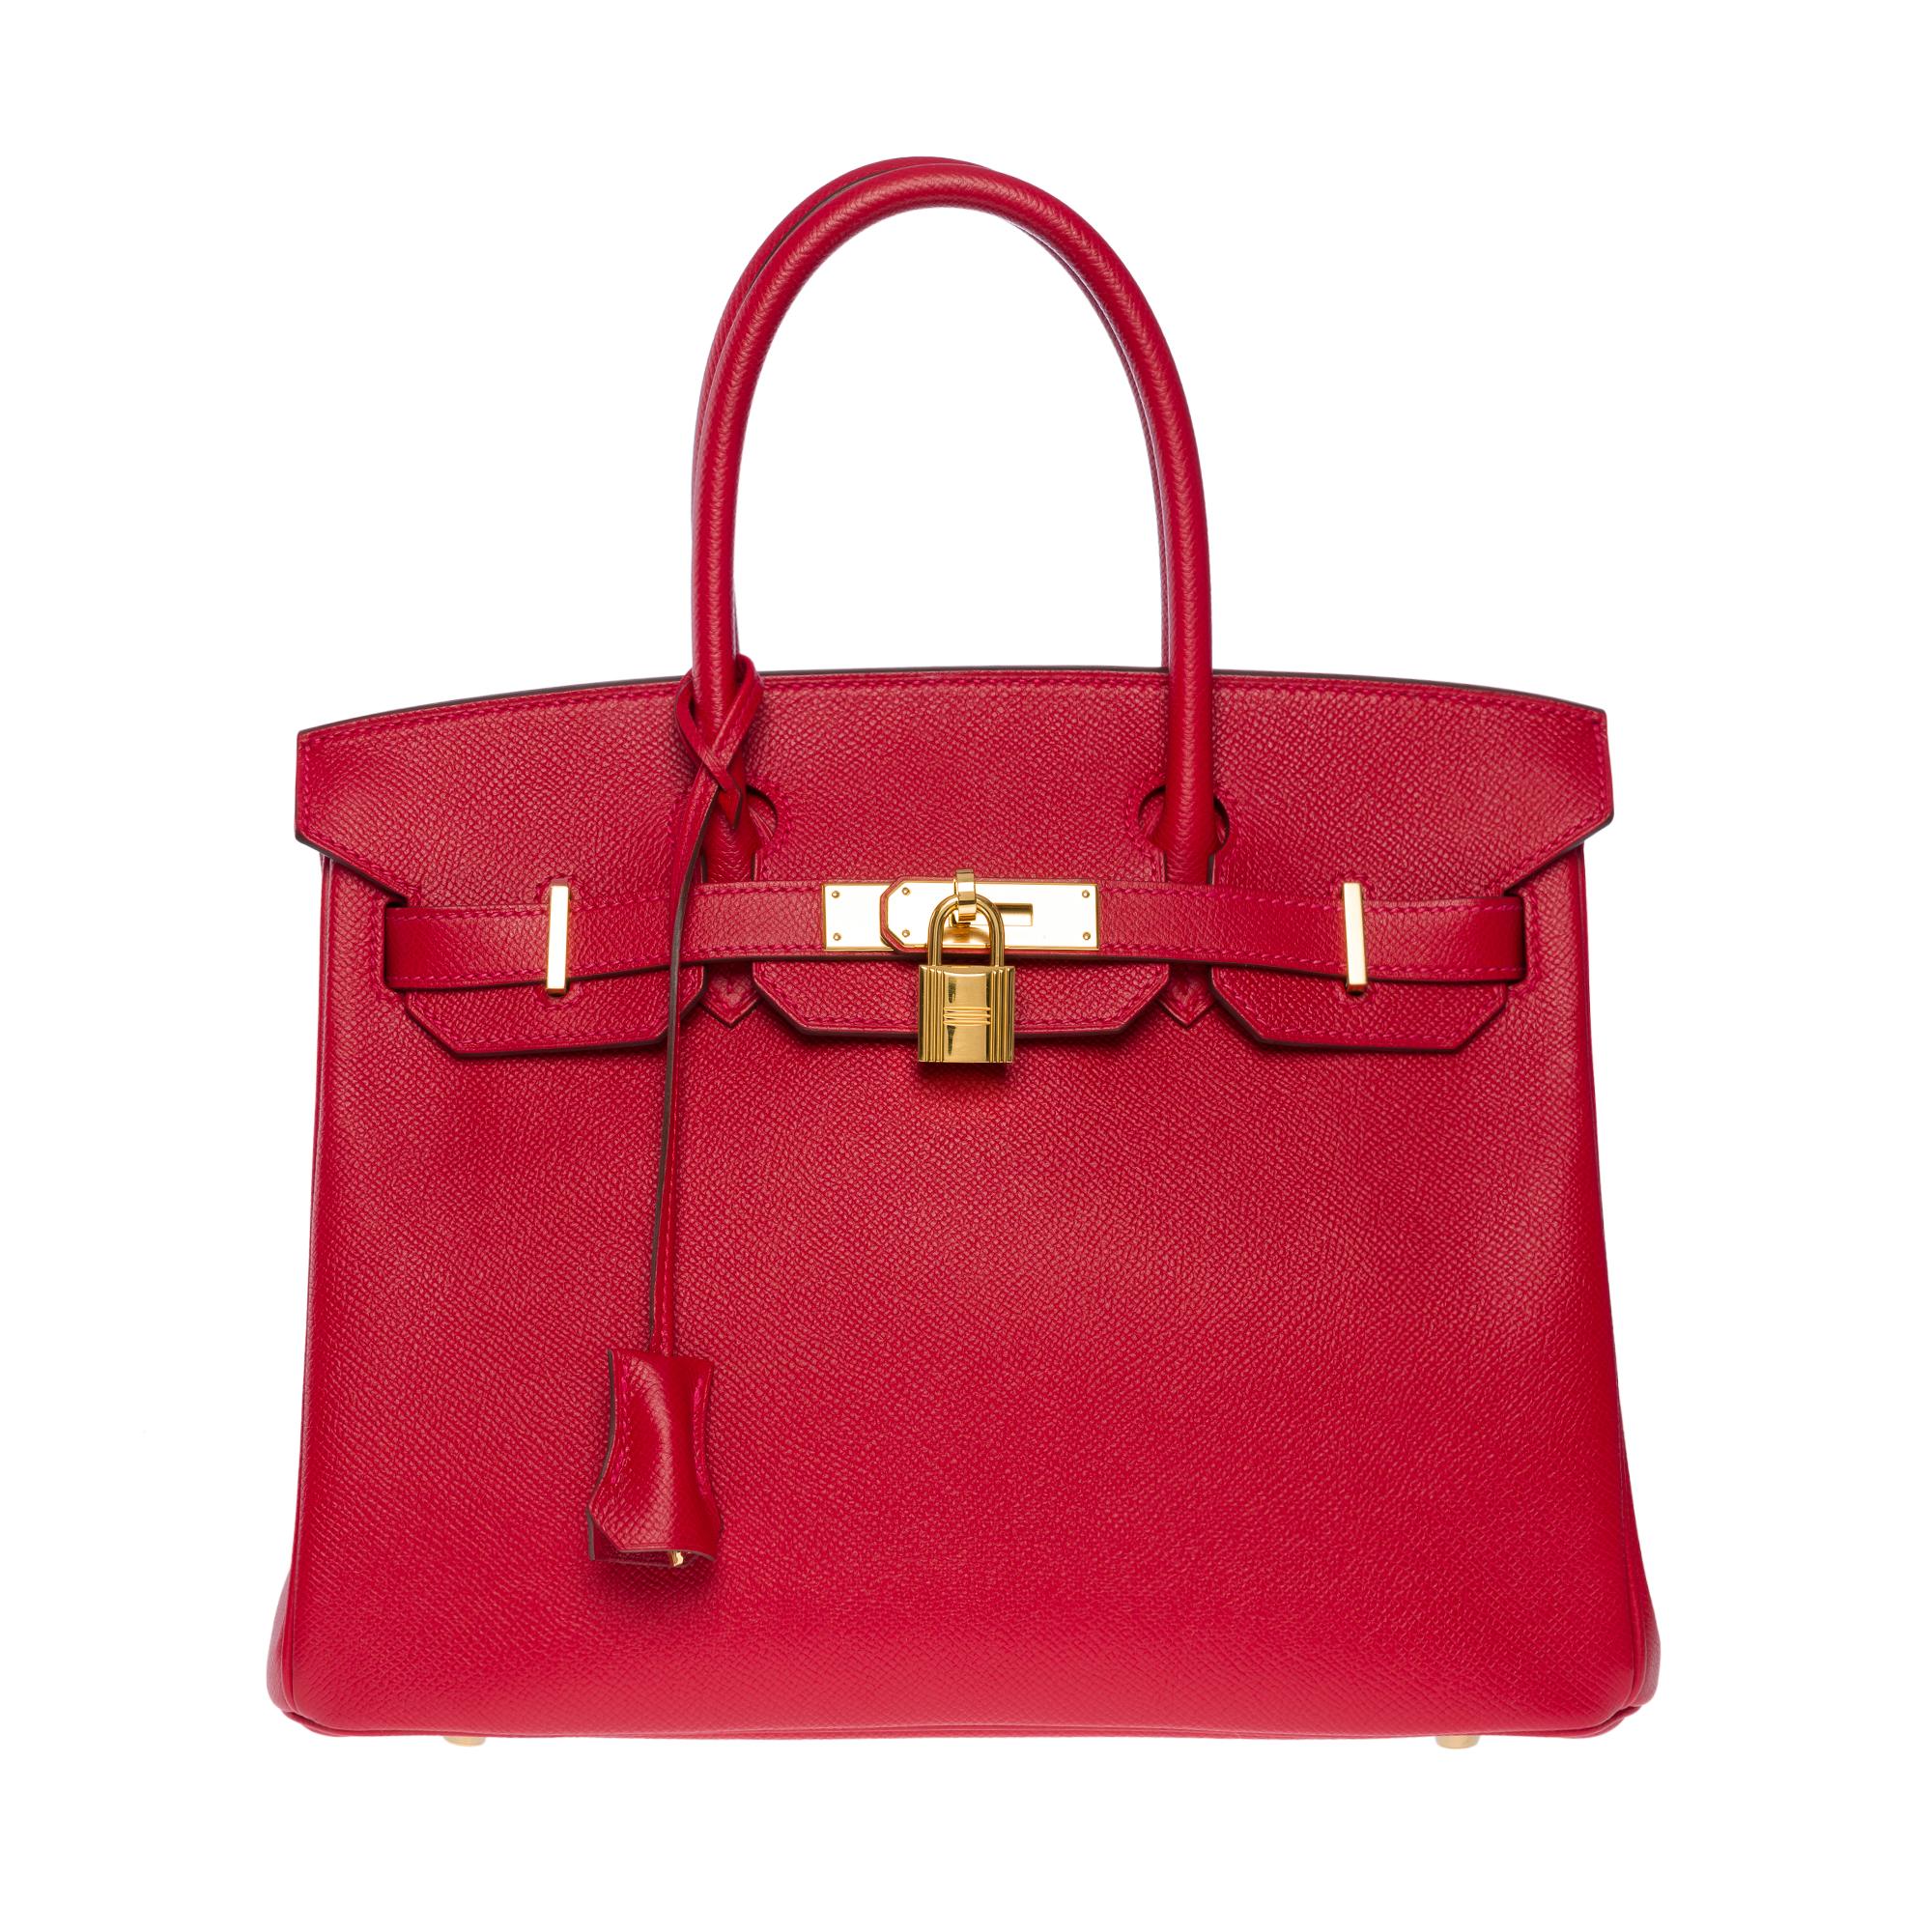 Exceptional Hermes Birkin 30 handbag in Epsom Red Casaque leather, gold plated metal hardware, double red leather handle for a hand-held

Flap closure
Red leather lining, one zippered pocket, one patch pocket
Signature: 